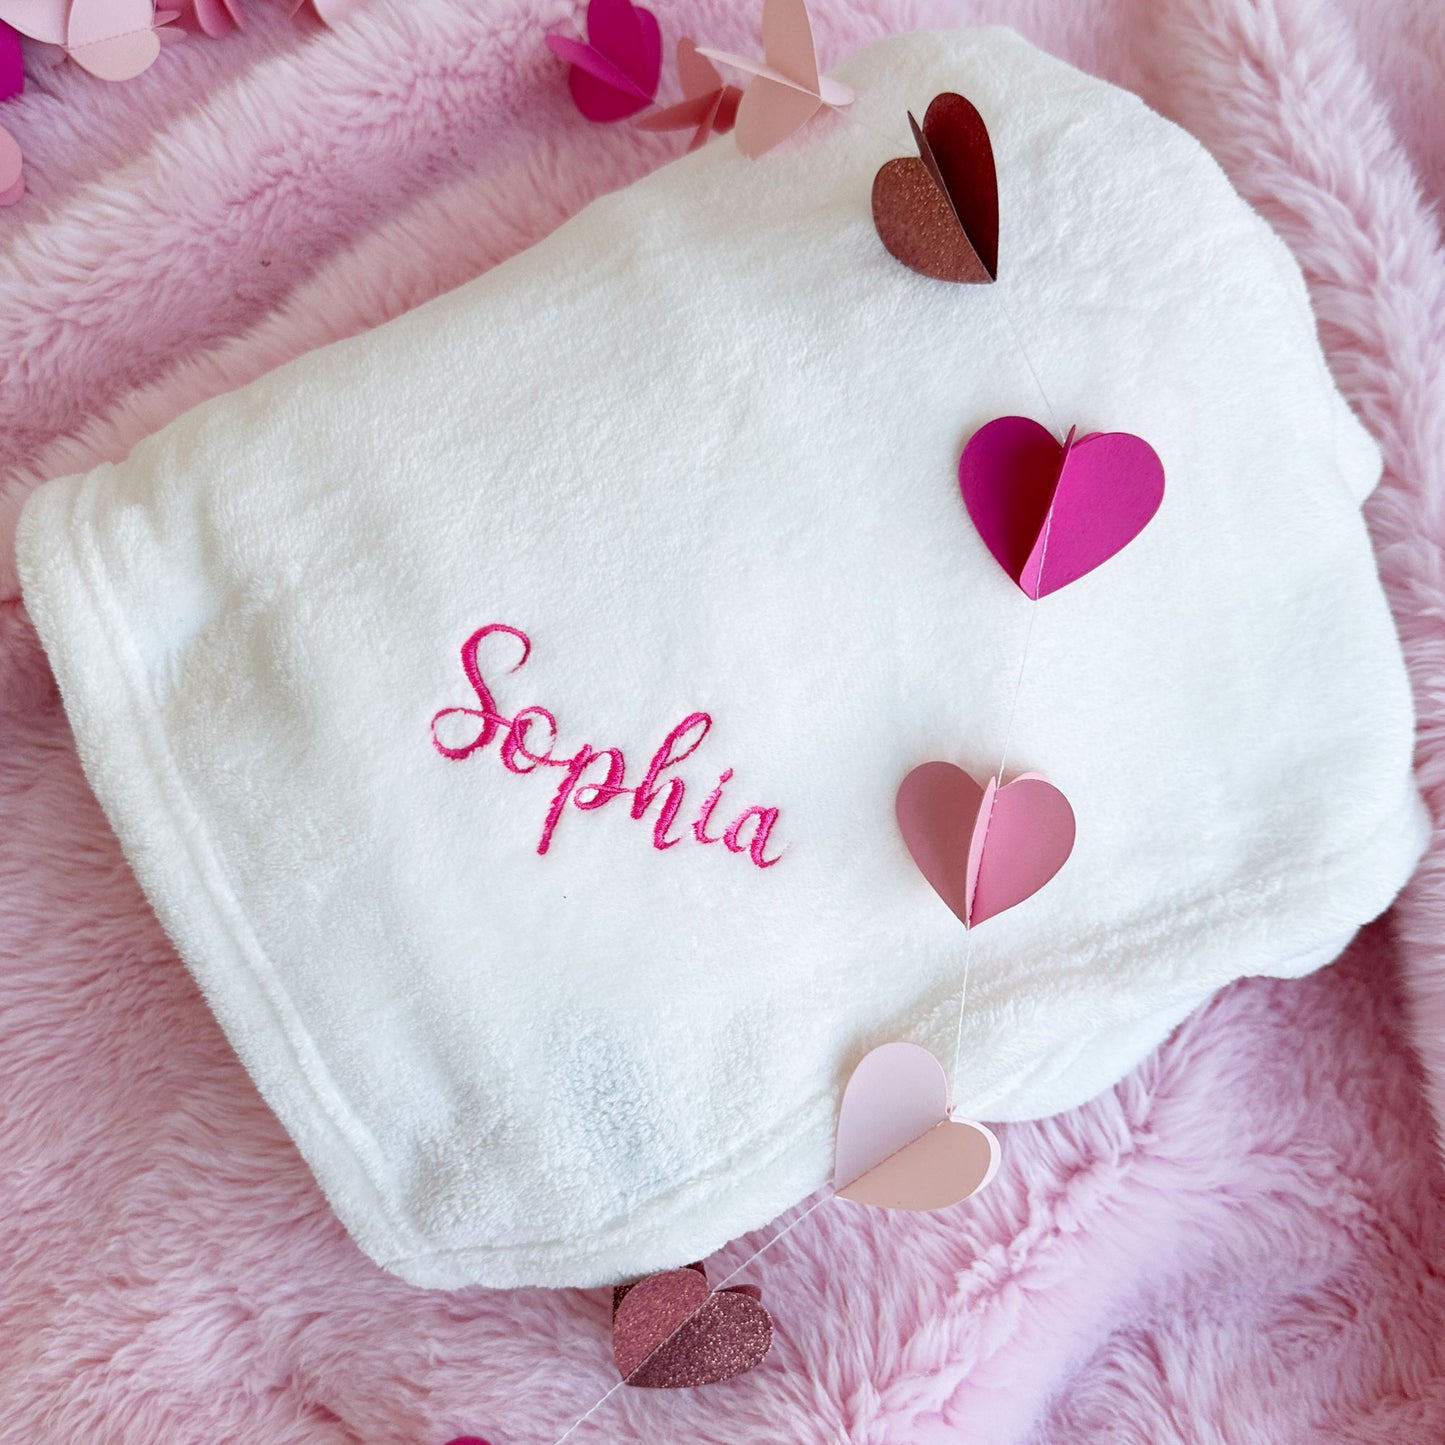 White blanket with sophia embroidered in pink 